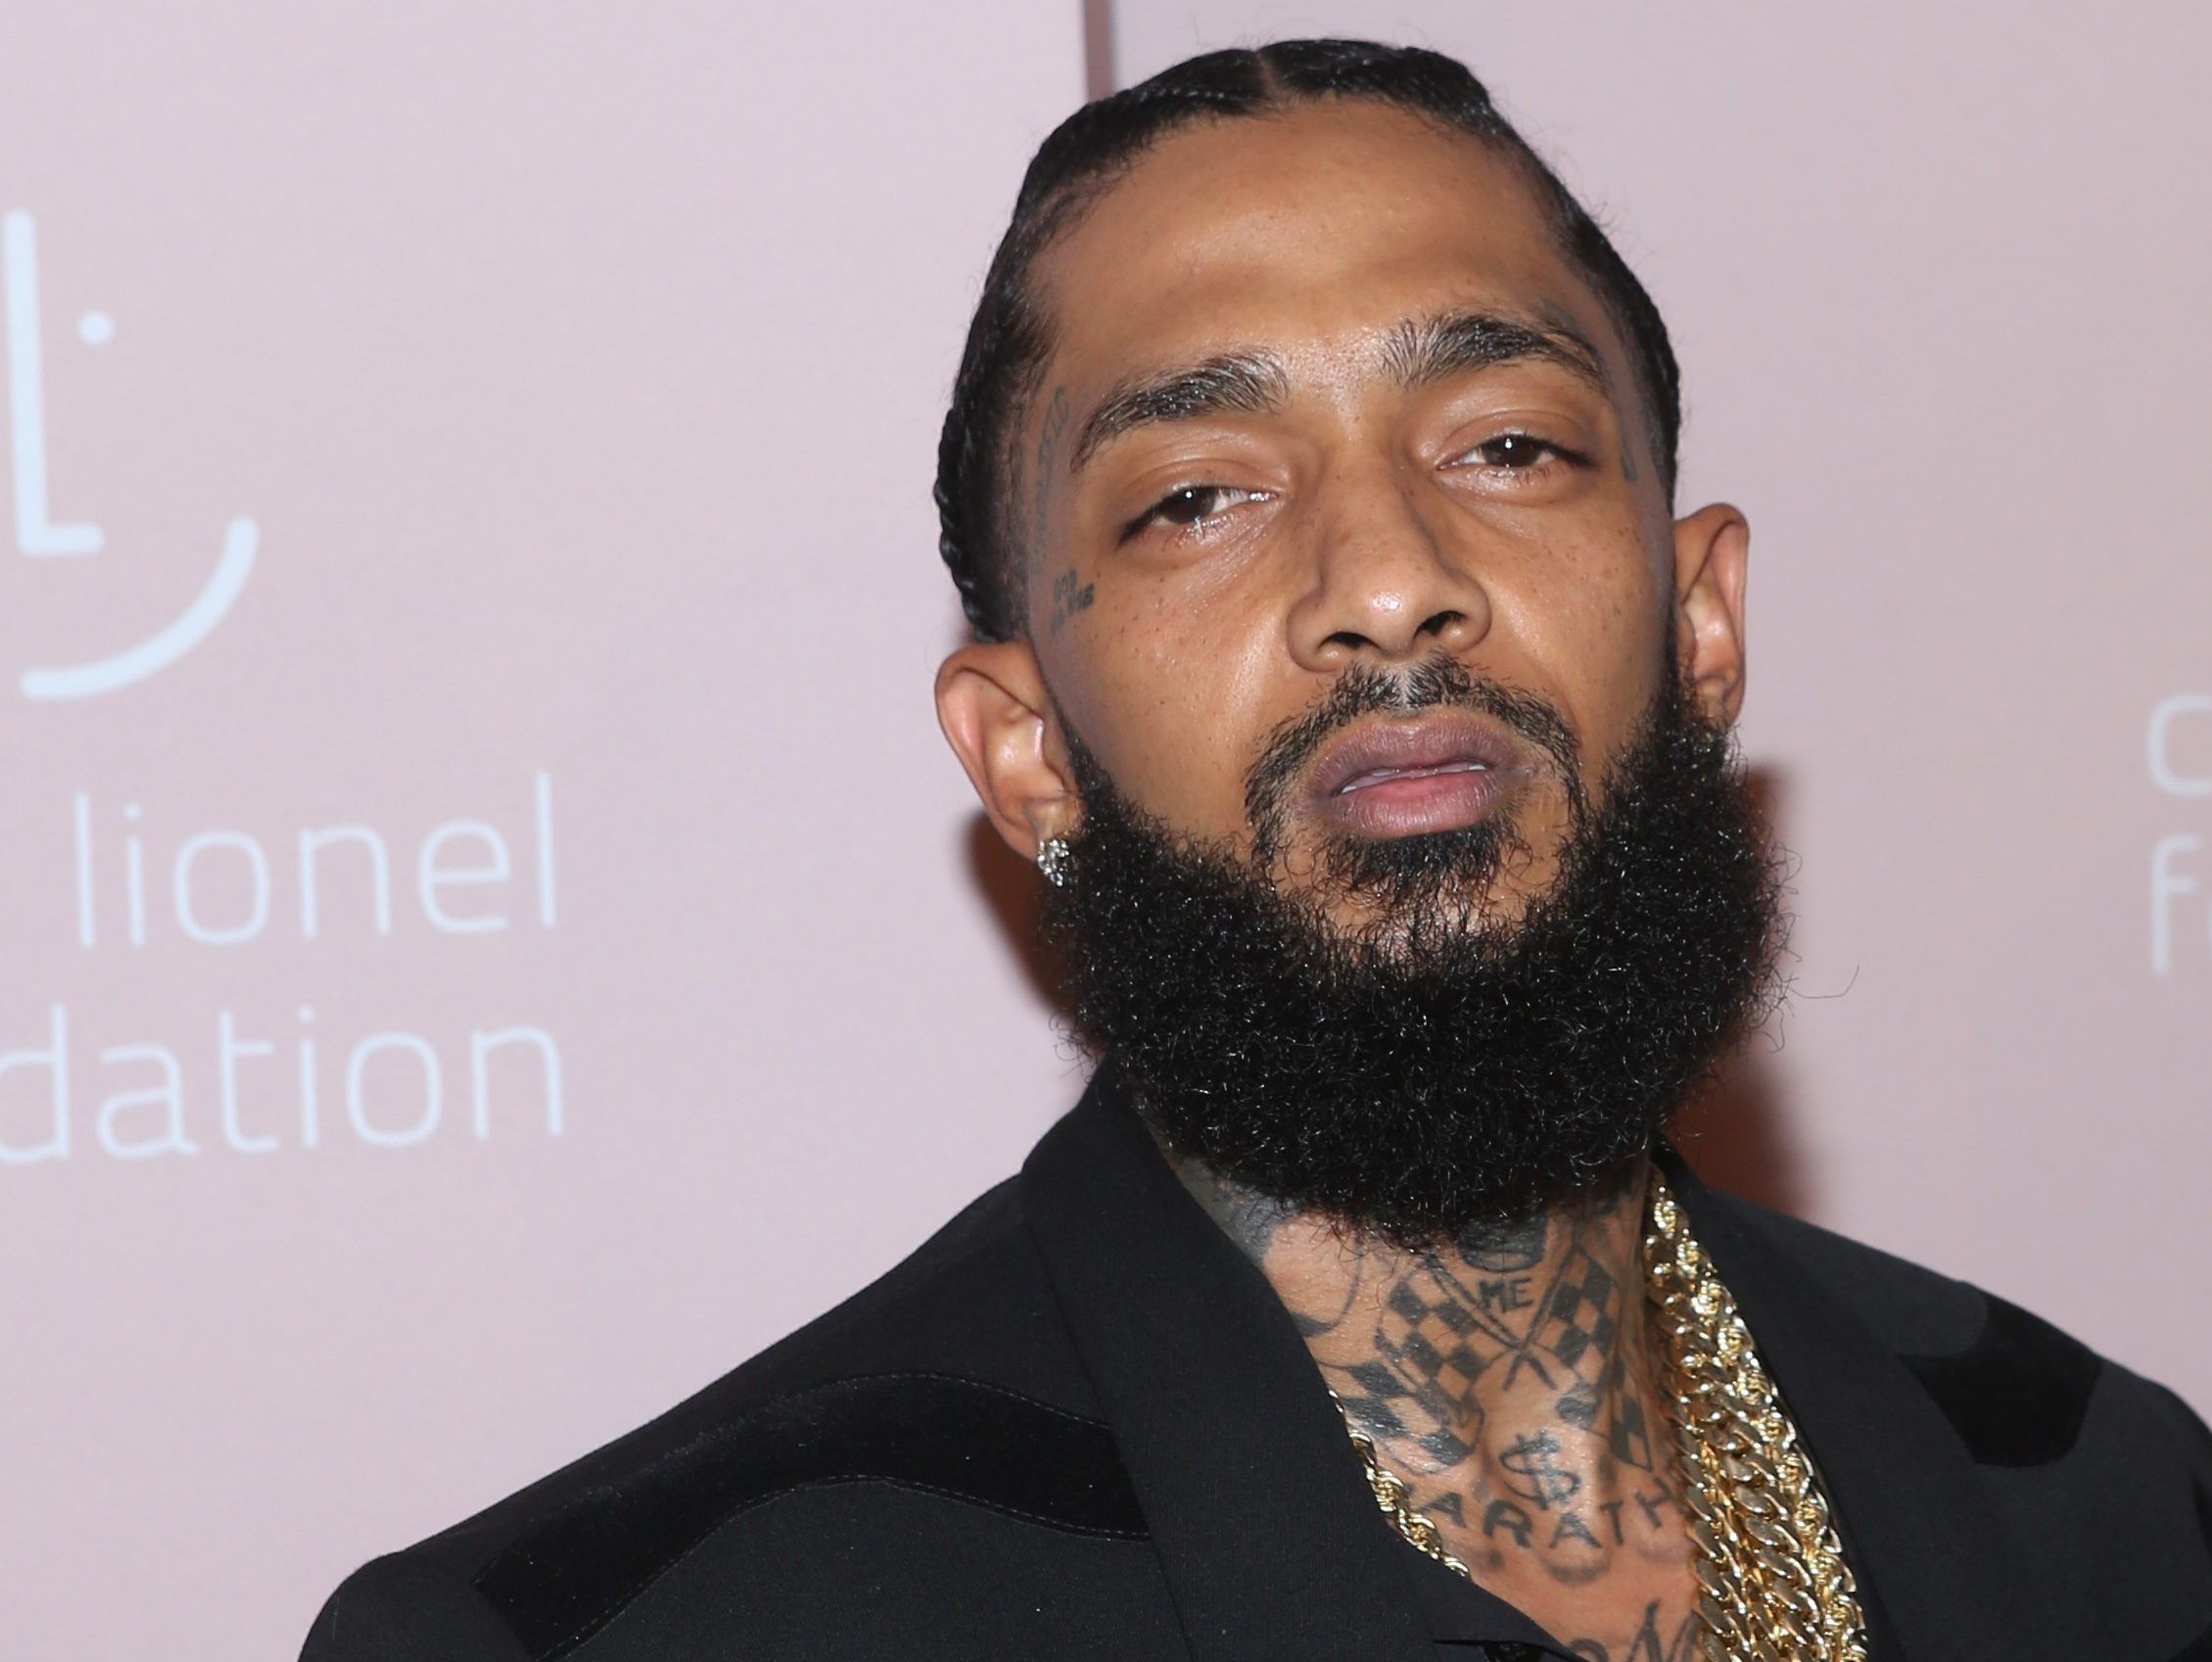 Nipsey Hussle and accused killer talked about snitching: Reports ...